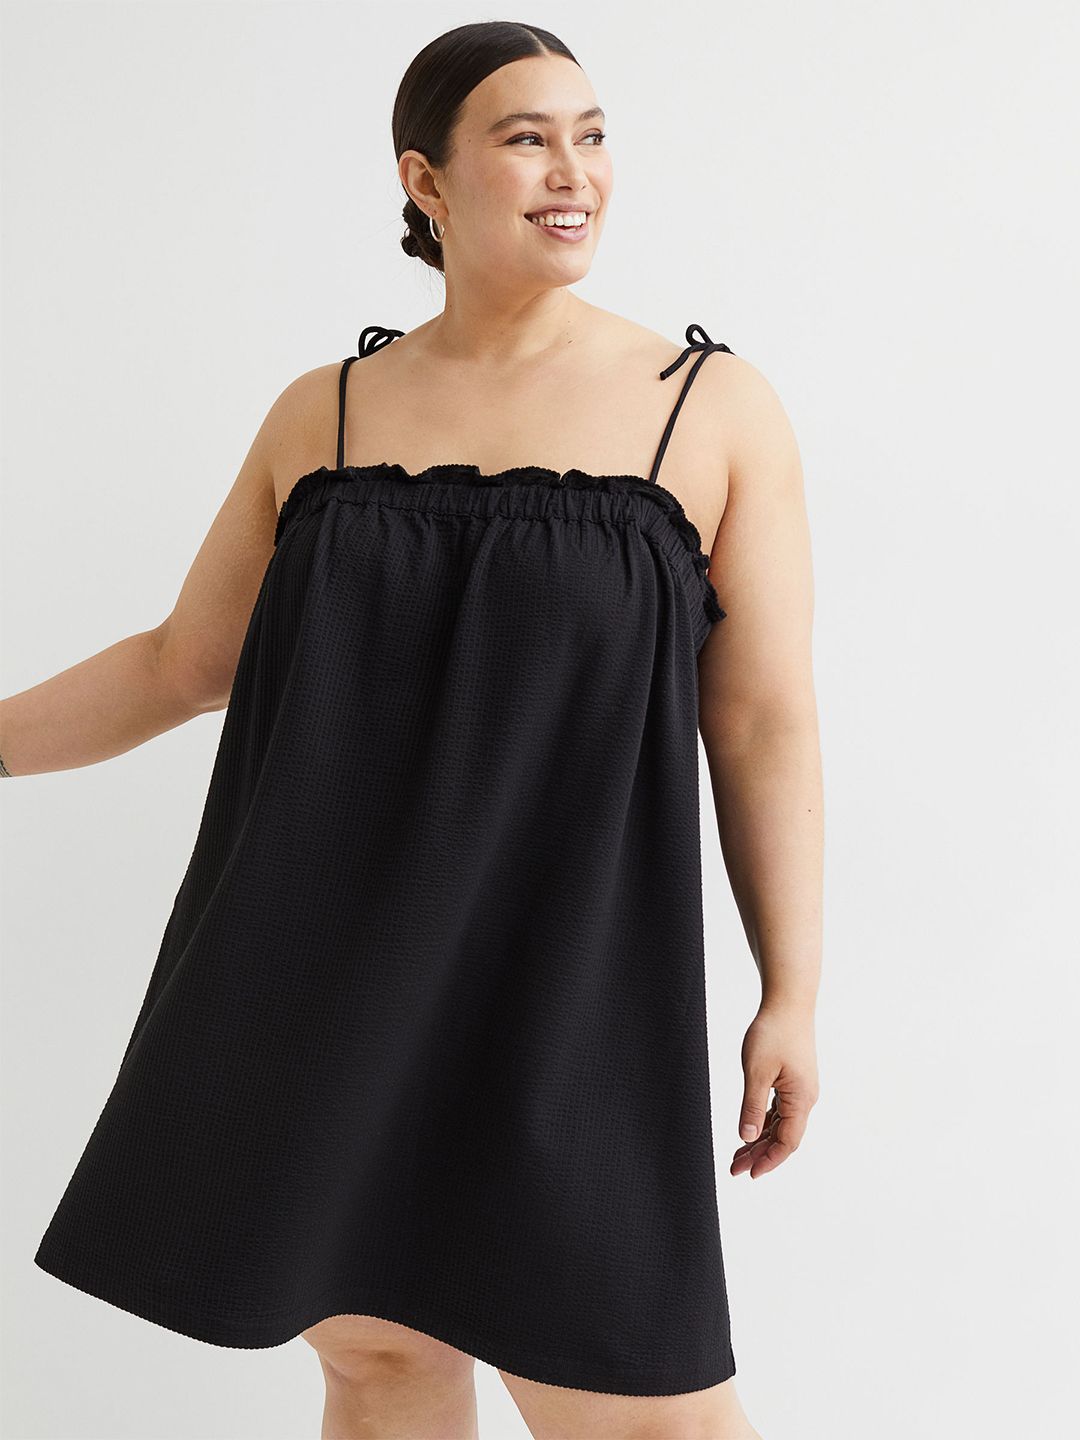 H&M+ Size Black Solid Waffled Jersey Dress Price in India